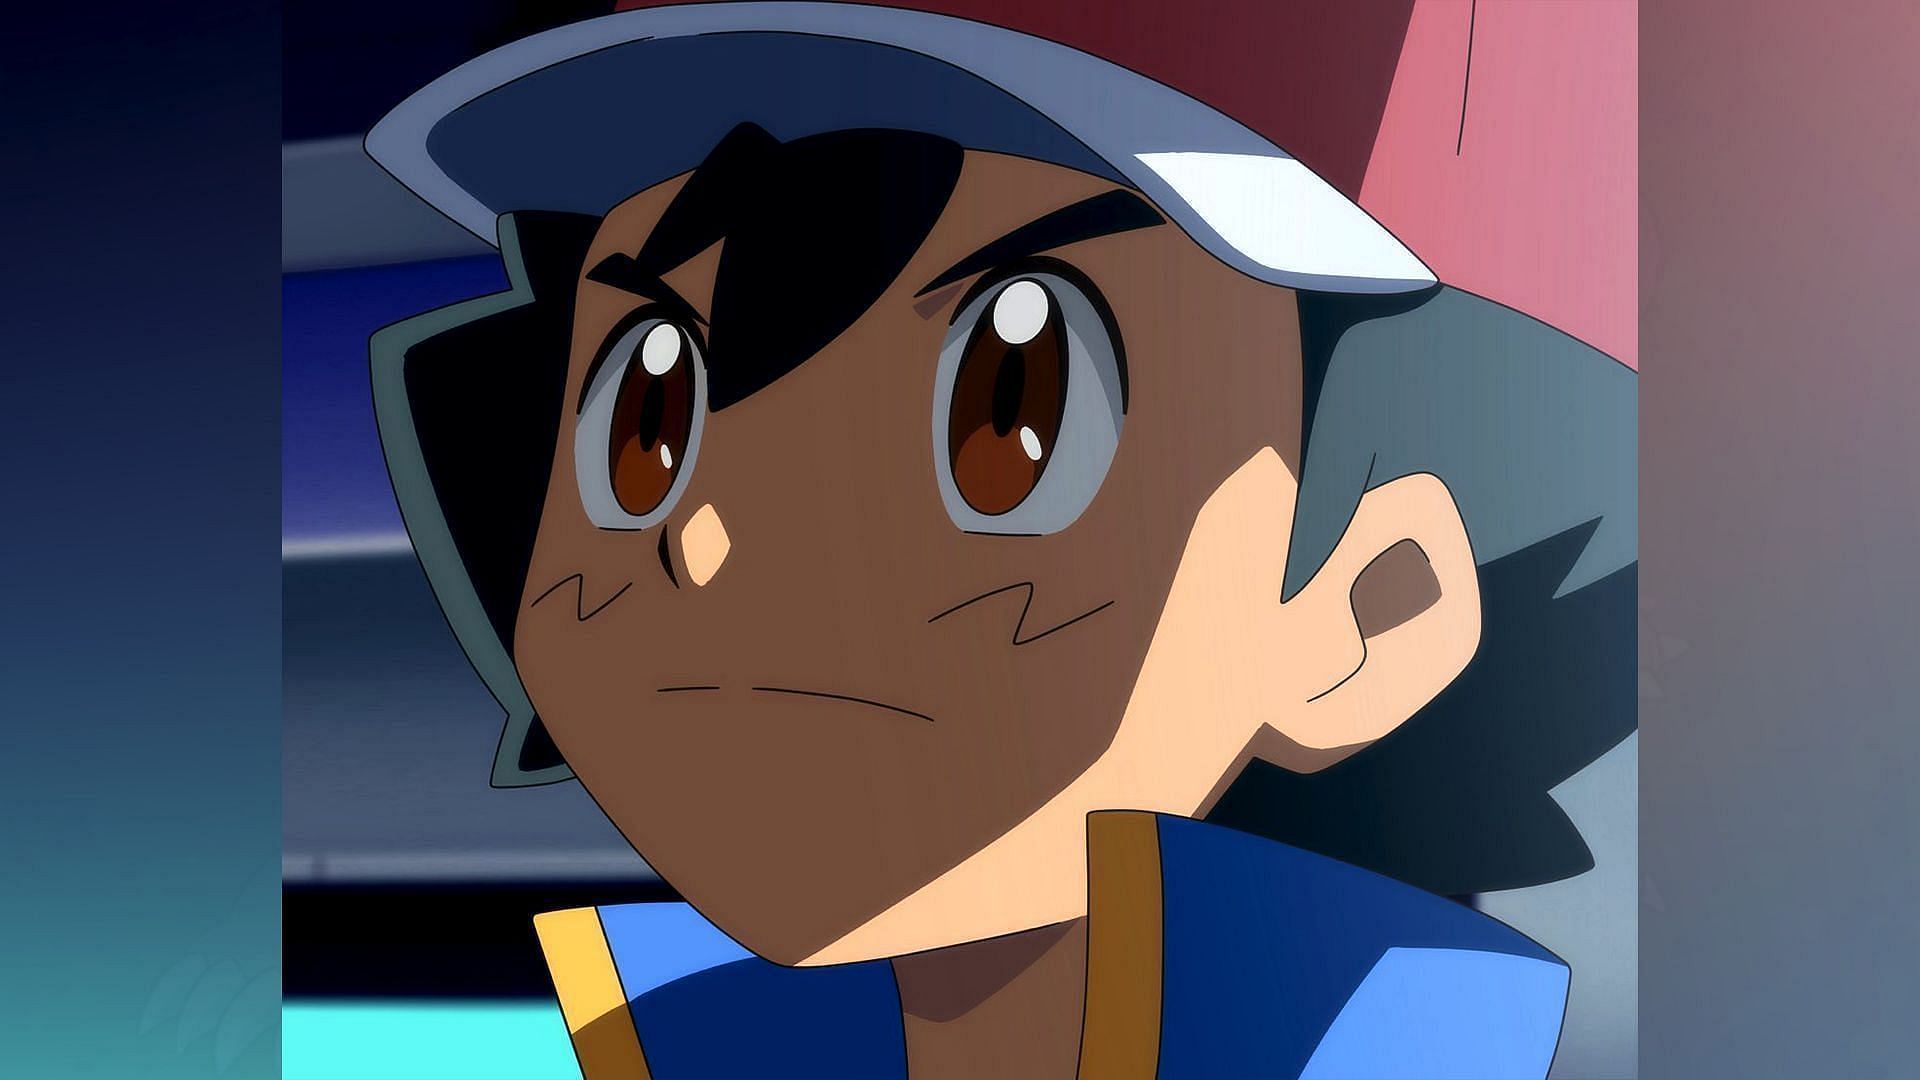 Ash Ketchum as he appears to be in the anime (Image via The Pokemon Company)